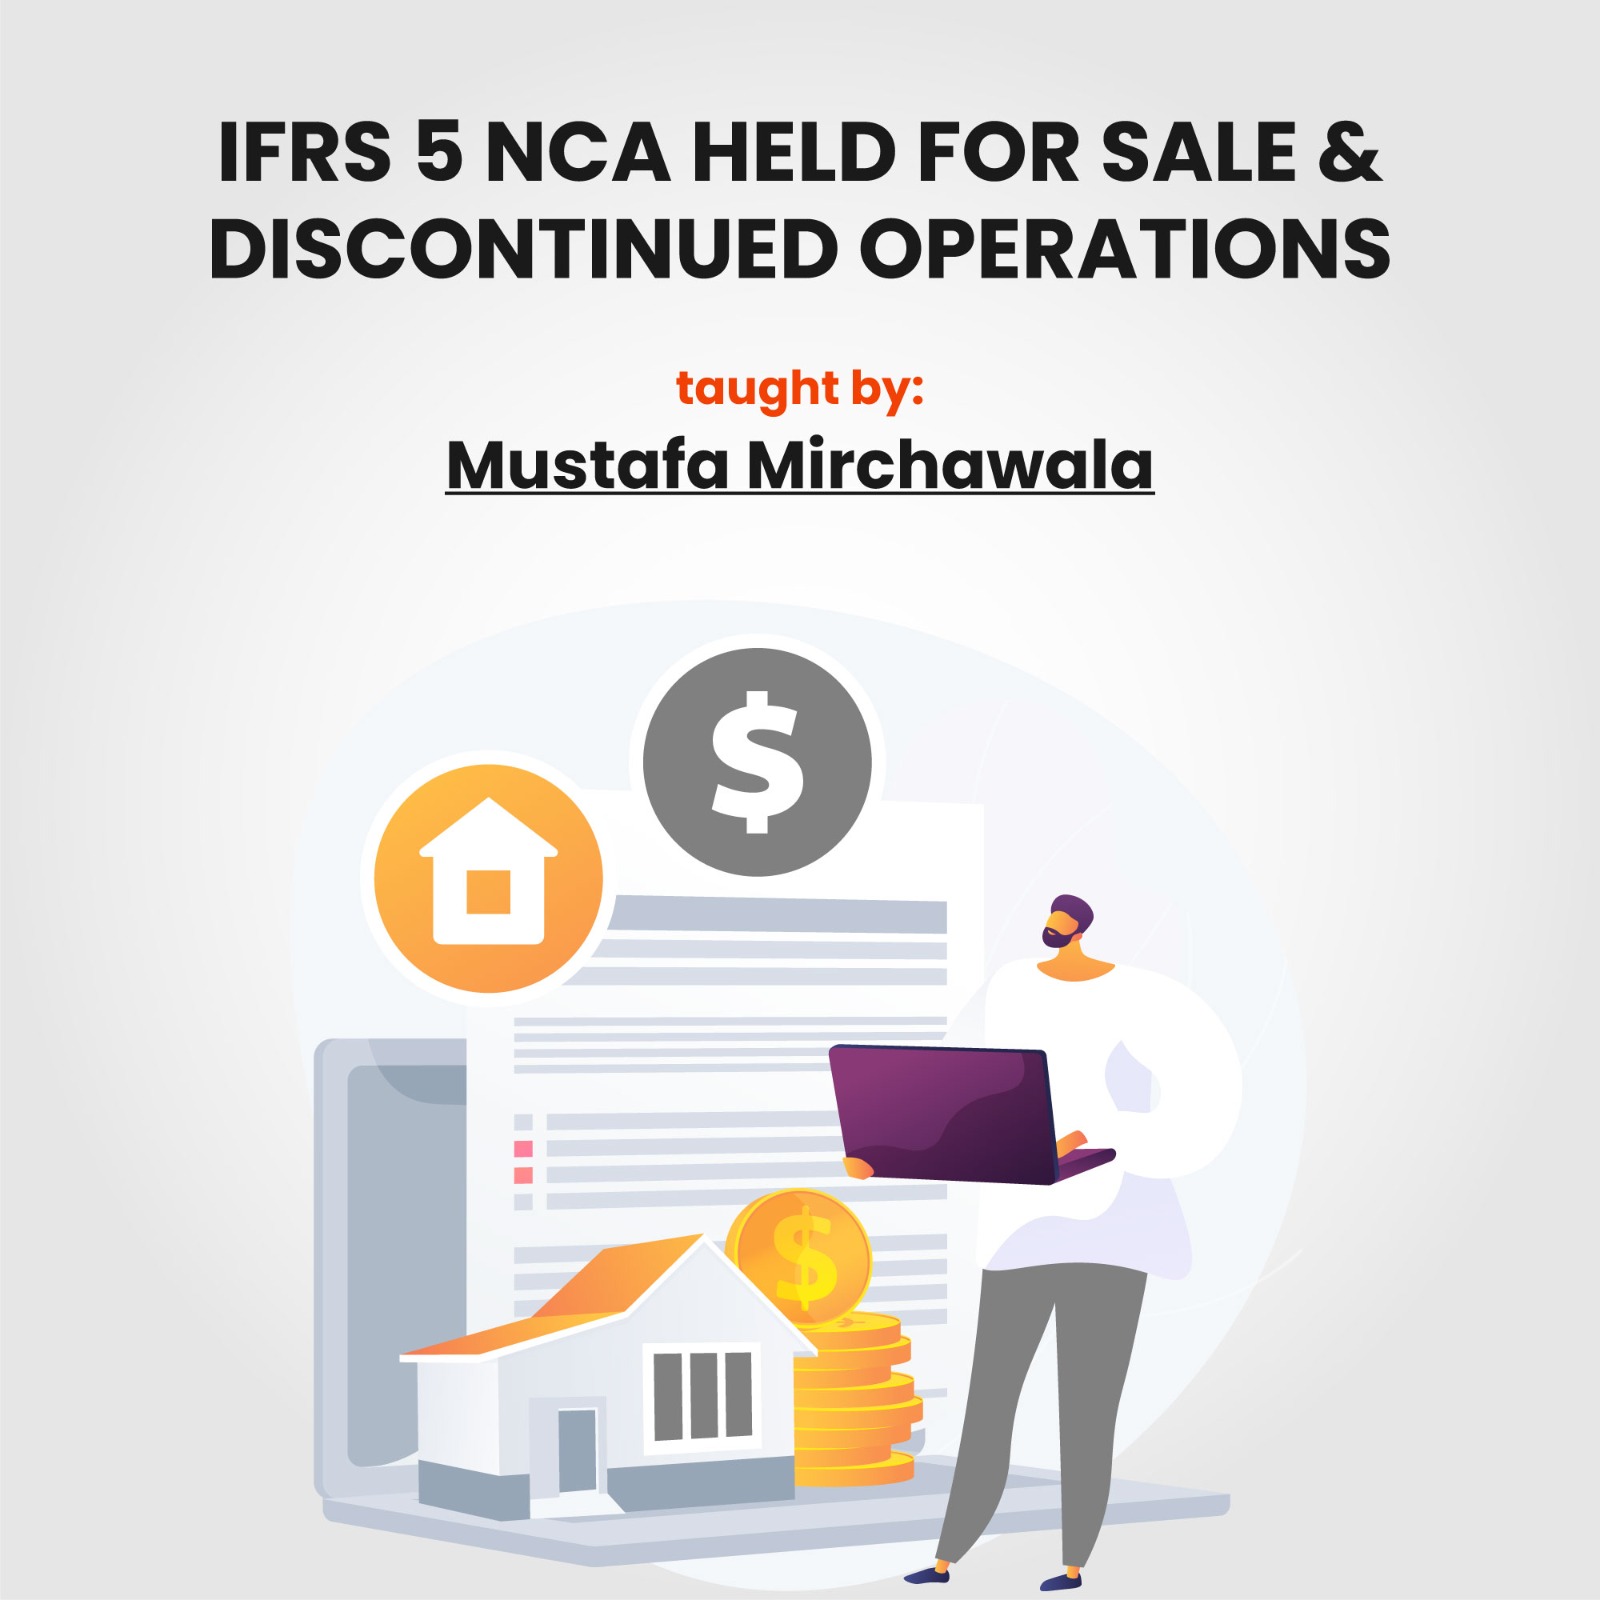 IFRS 5 – Noncurrent Asset Held for Sale & Discontinued Operations